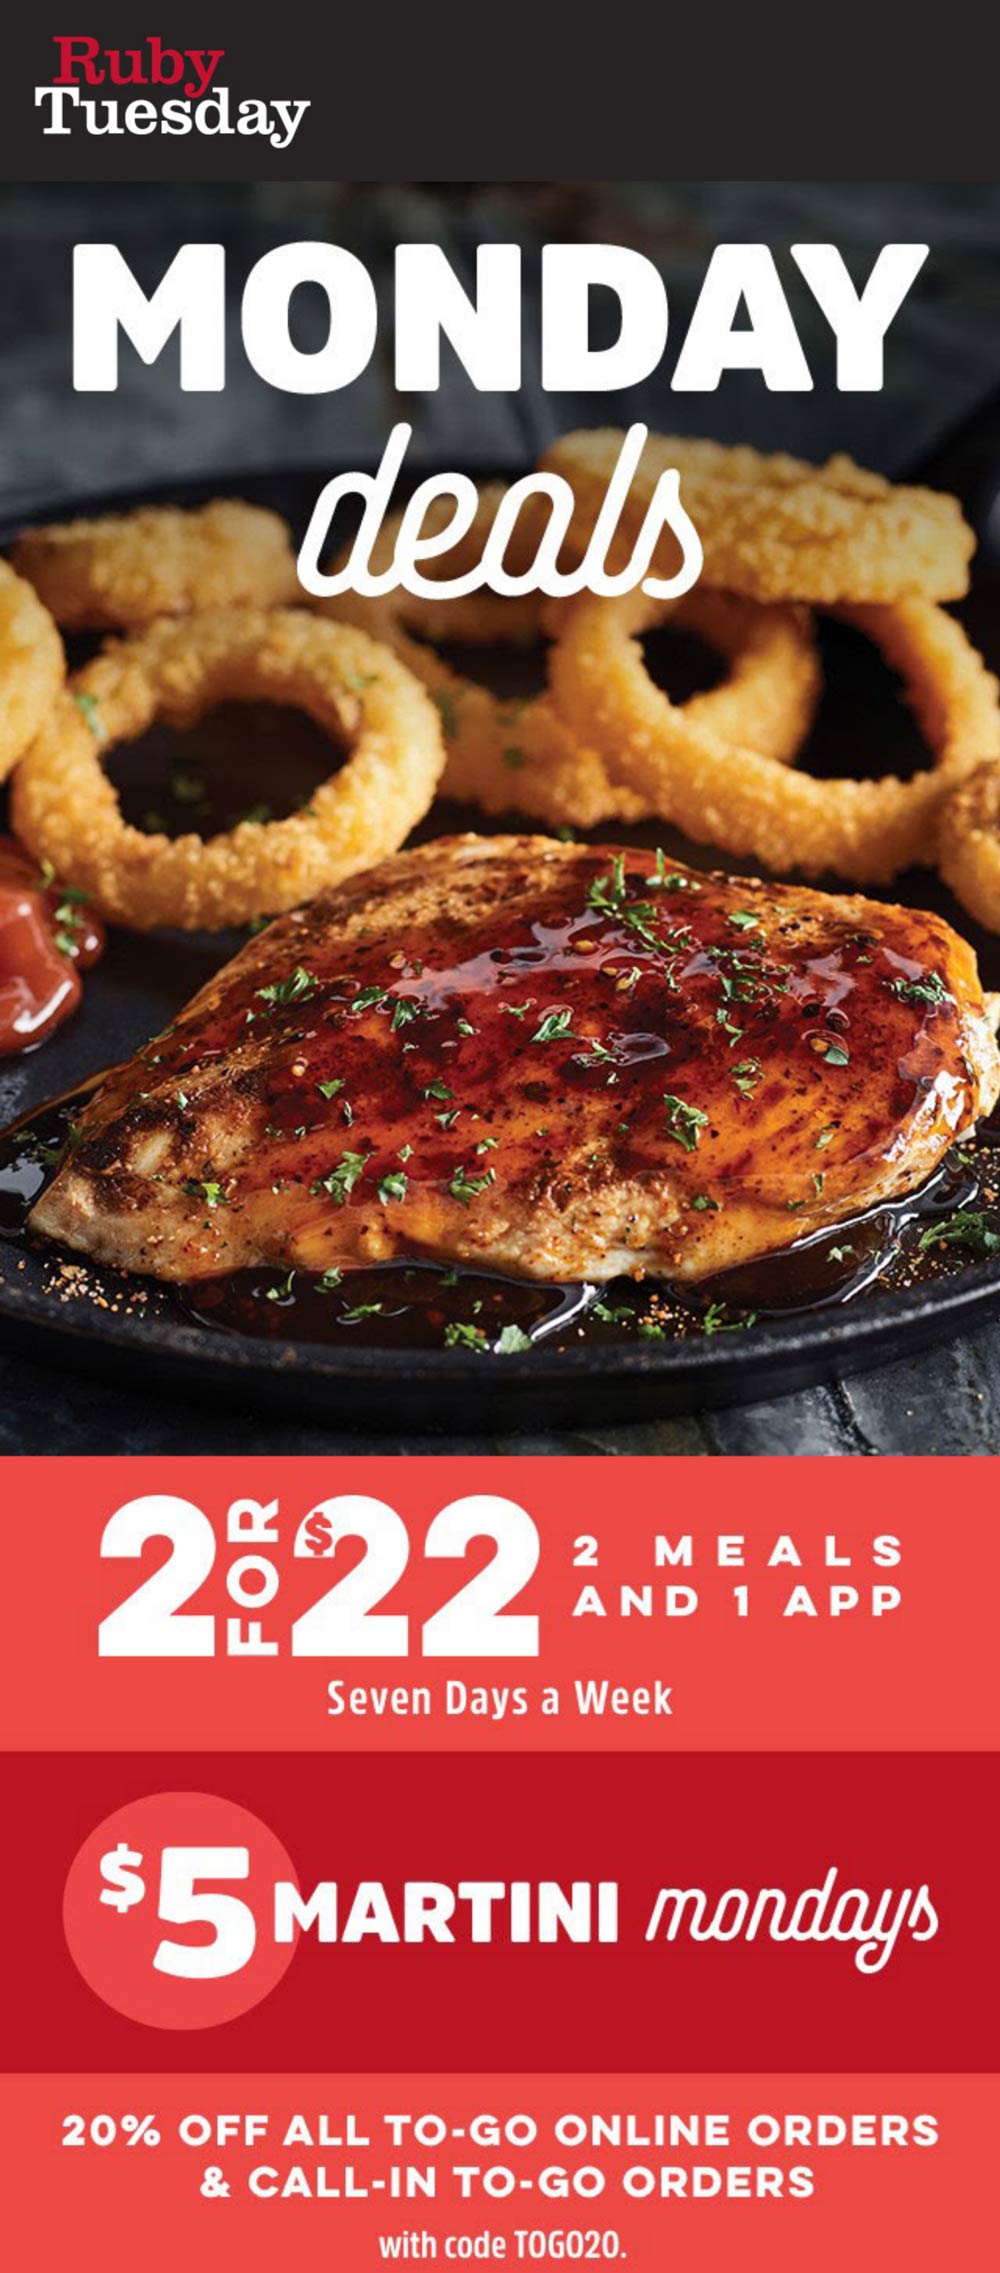 Ruby Tuesday restaurants Coupon  2 meals + appetizer = $22 also 20% off today at Ruby Tuesday via promo code TOGO20 #rubytuesday 